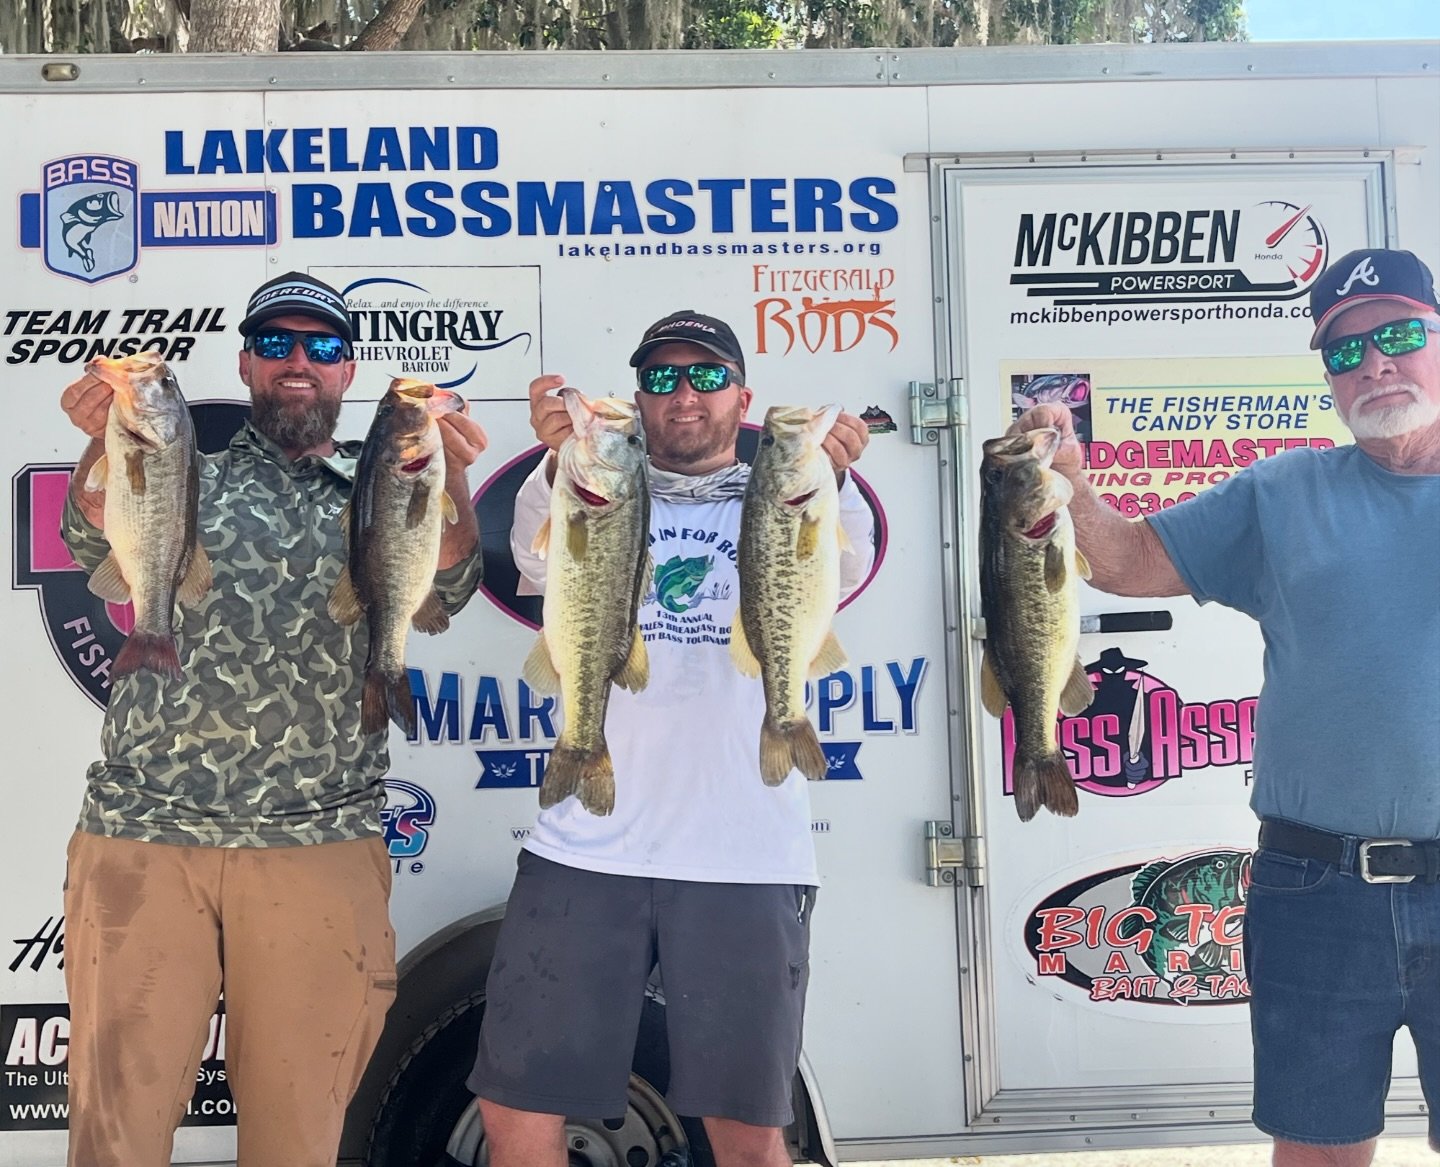 Yesterday David and I walked up the win on Panasoffkee. Fun but tough day walking a topwater until our arms were falling off for 5 of the right bites on a lake neither of us had been to before. 
Winning setup for us: ⏬

Dobyns Champion 734
CPF Lures 